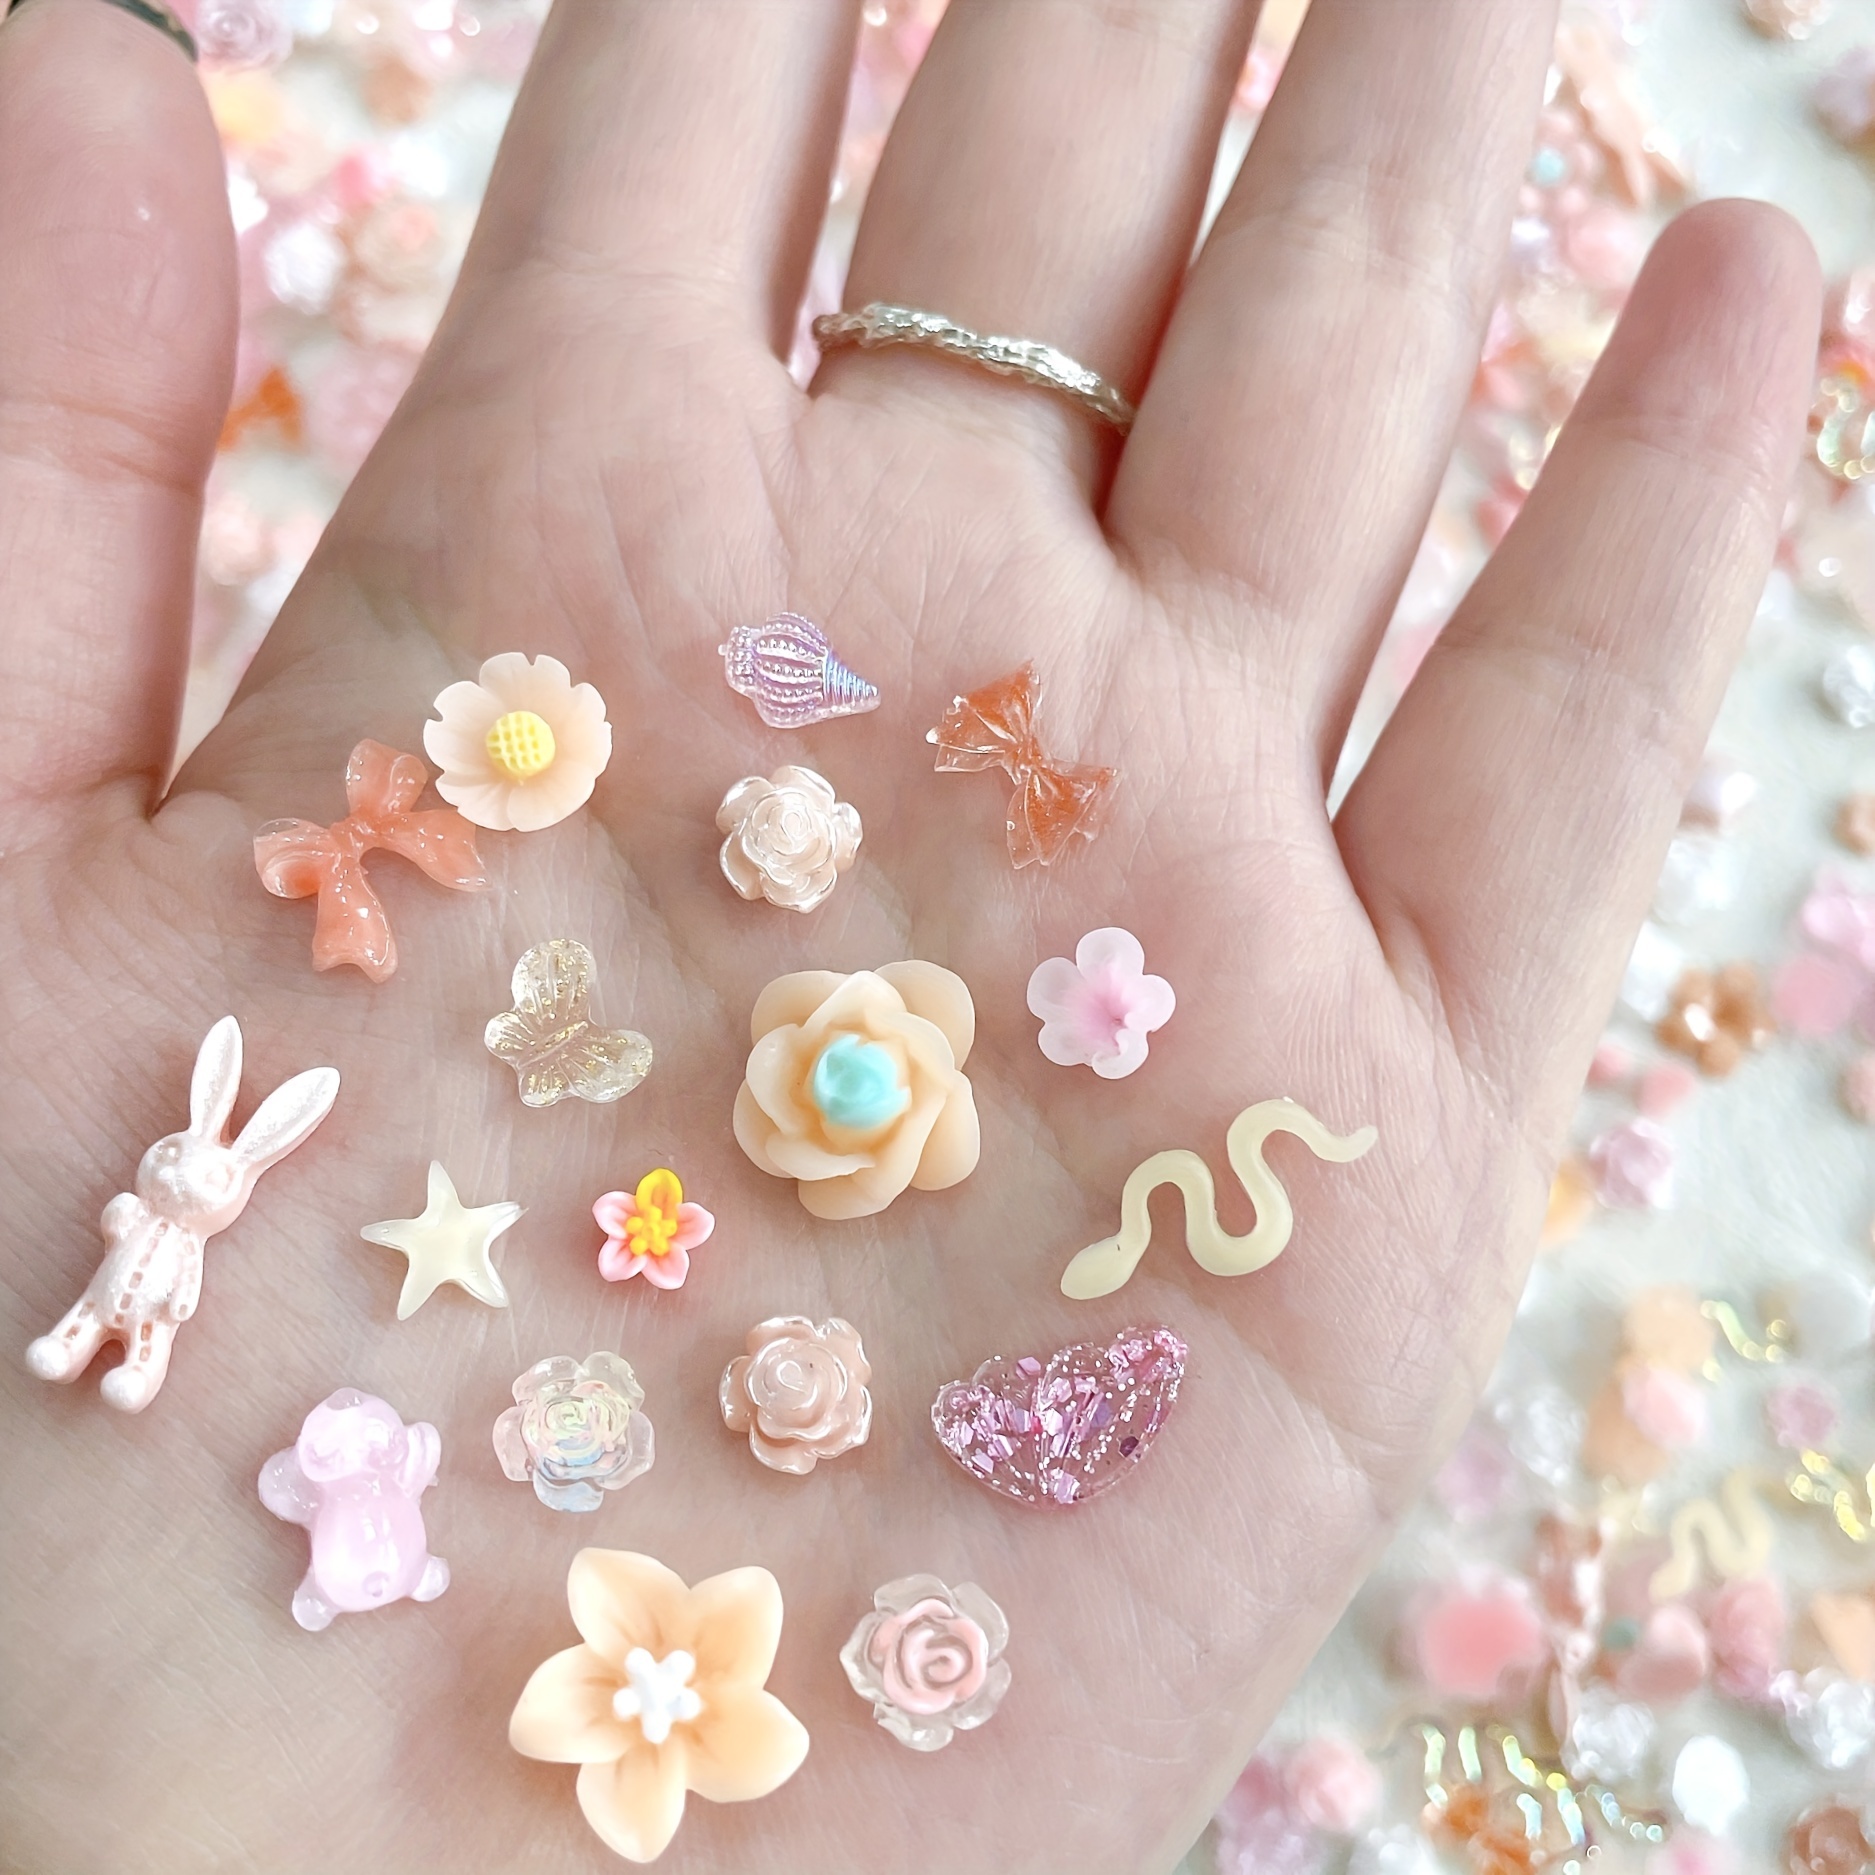  Kawaii Charm Bracelet in Green & Pink, Cute Food and Resin  Charms, Chunky Dangle Bracelet with Flower Cherry and Rabbit : Handmade  Products